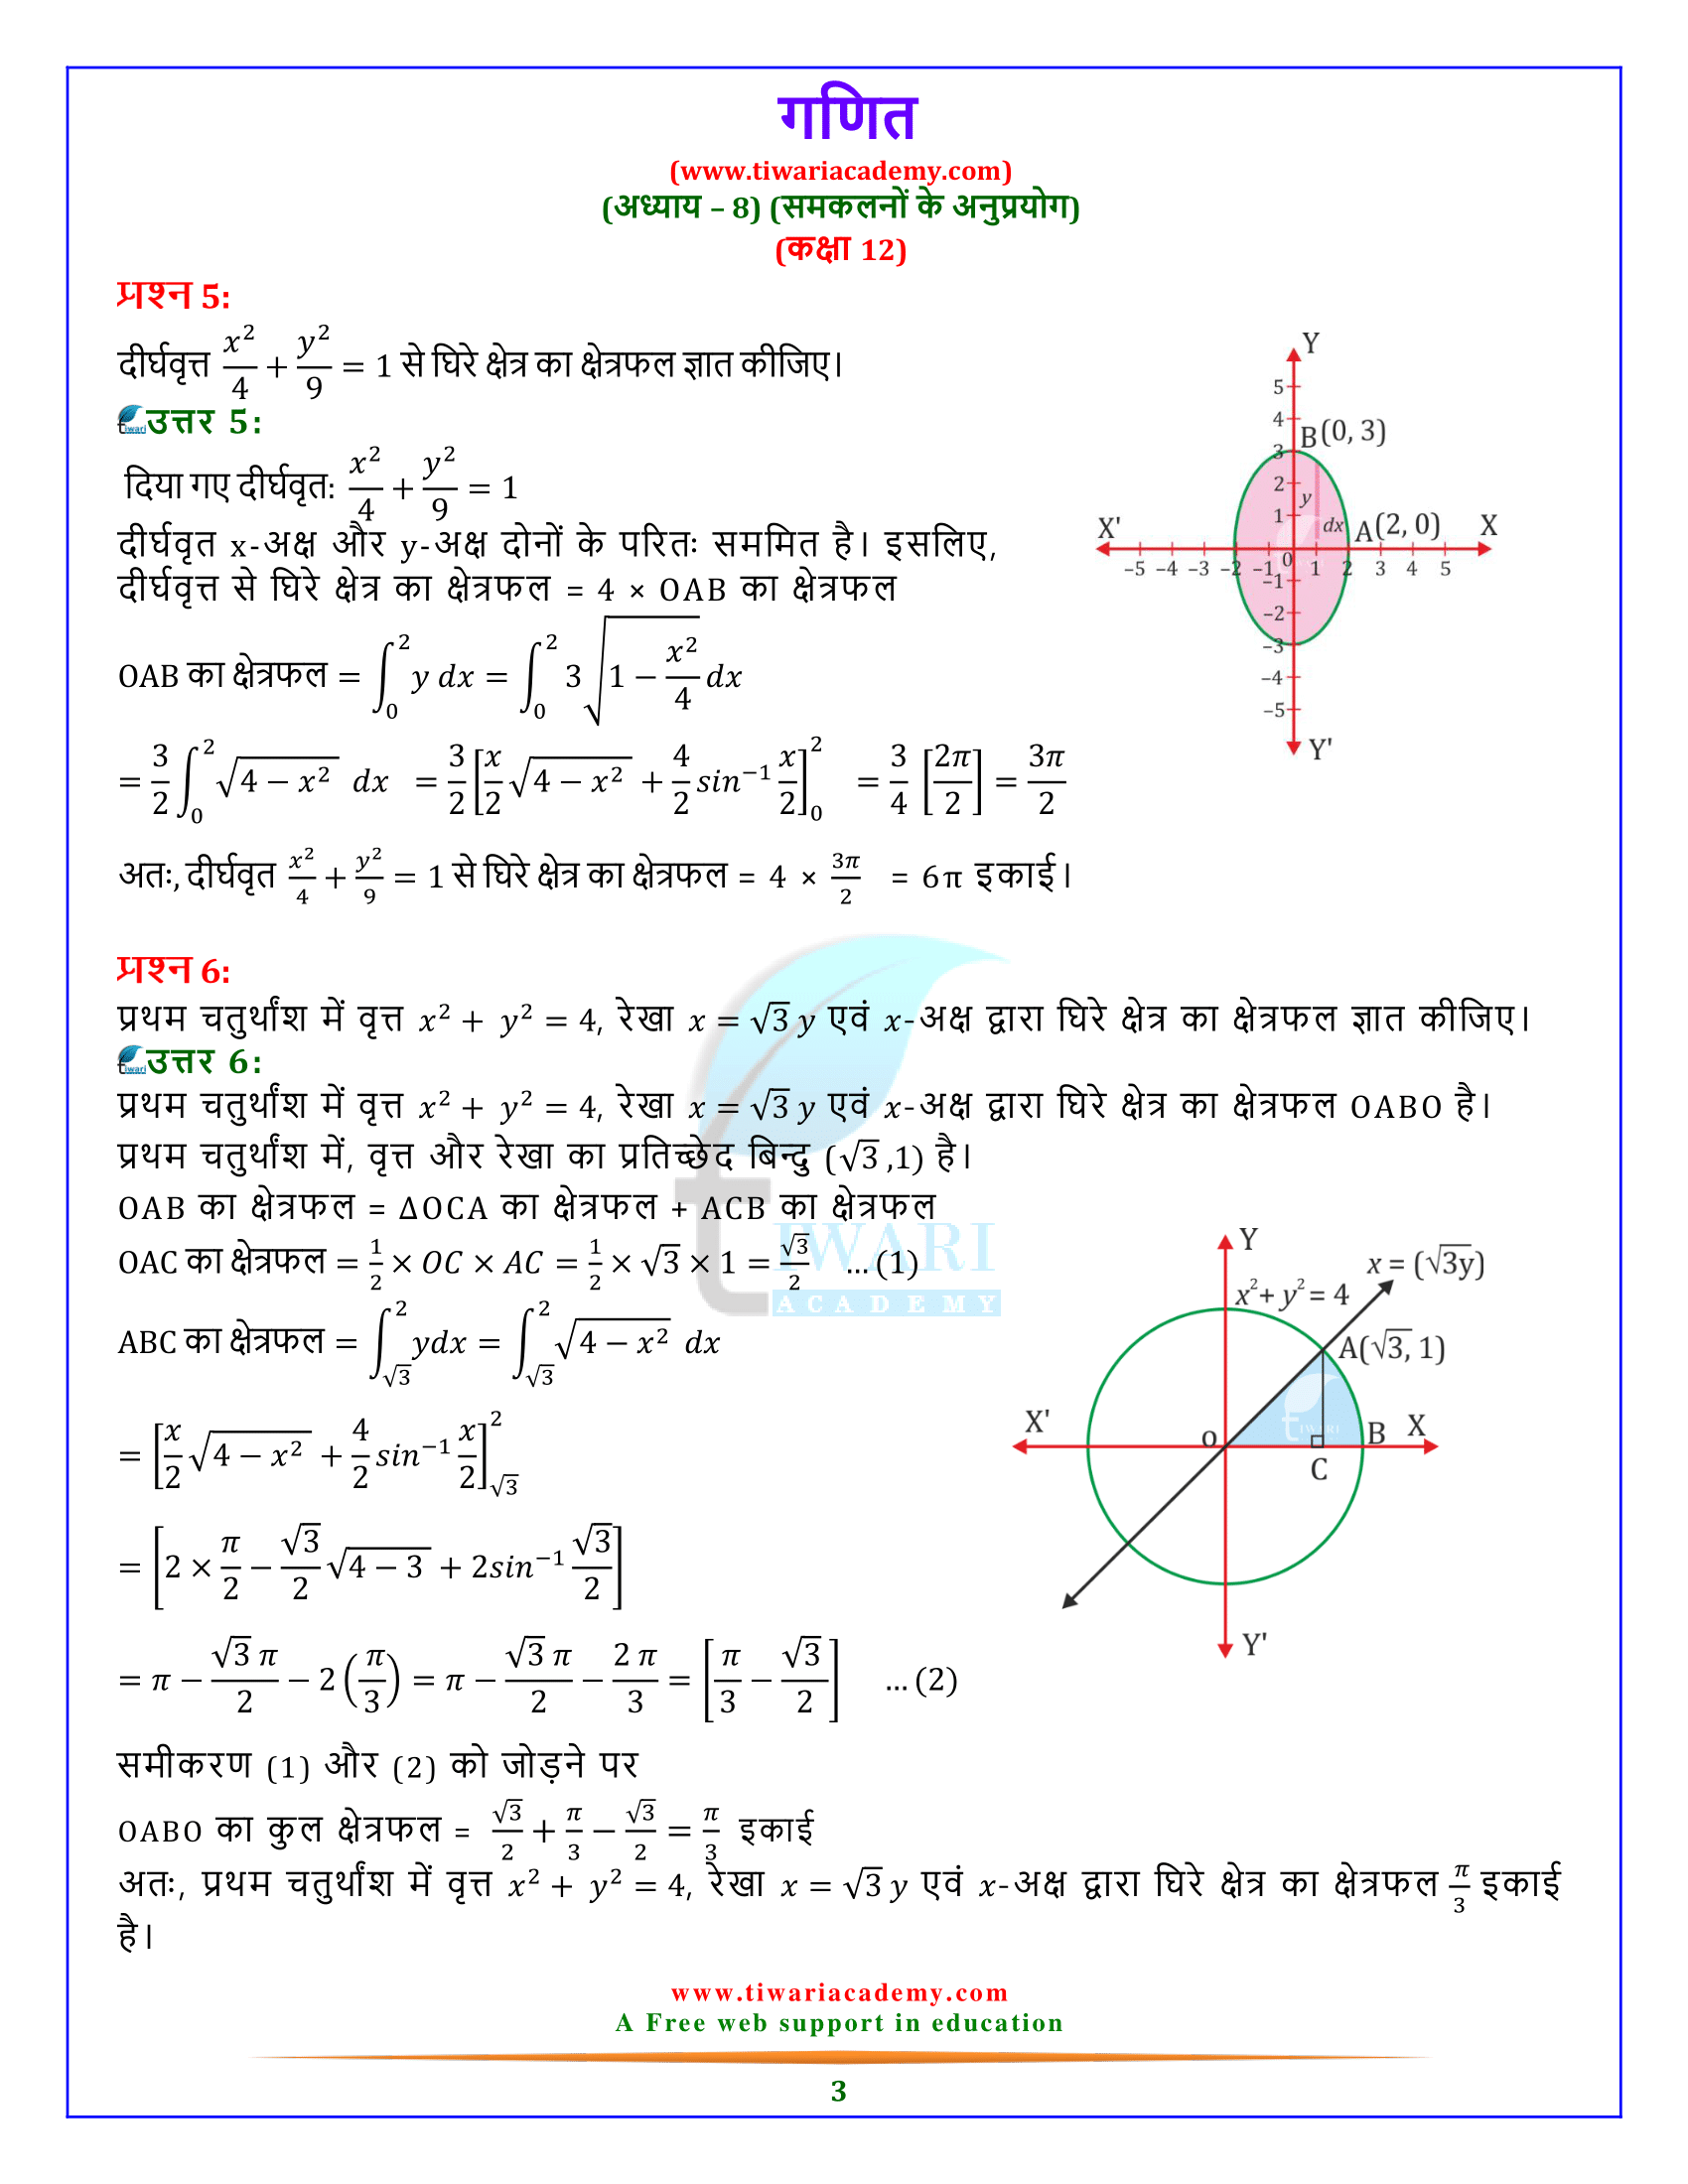 Class 12 Maths solution chapter 8 exercise 8.1 in hindi medium